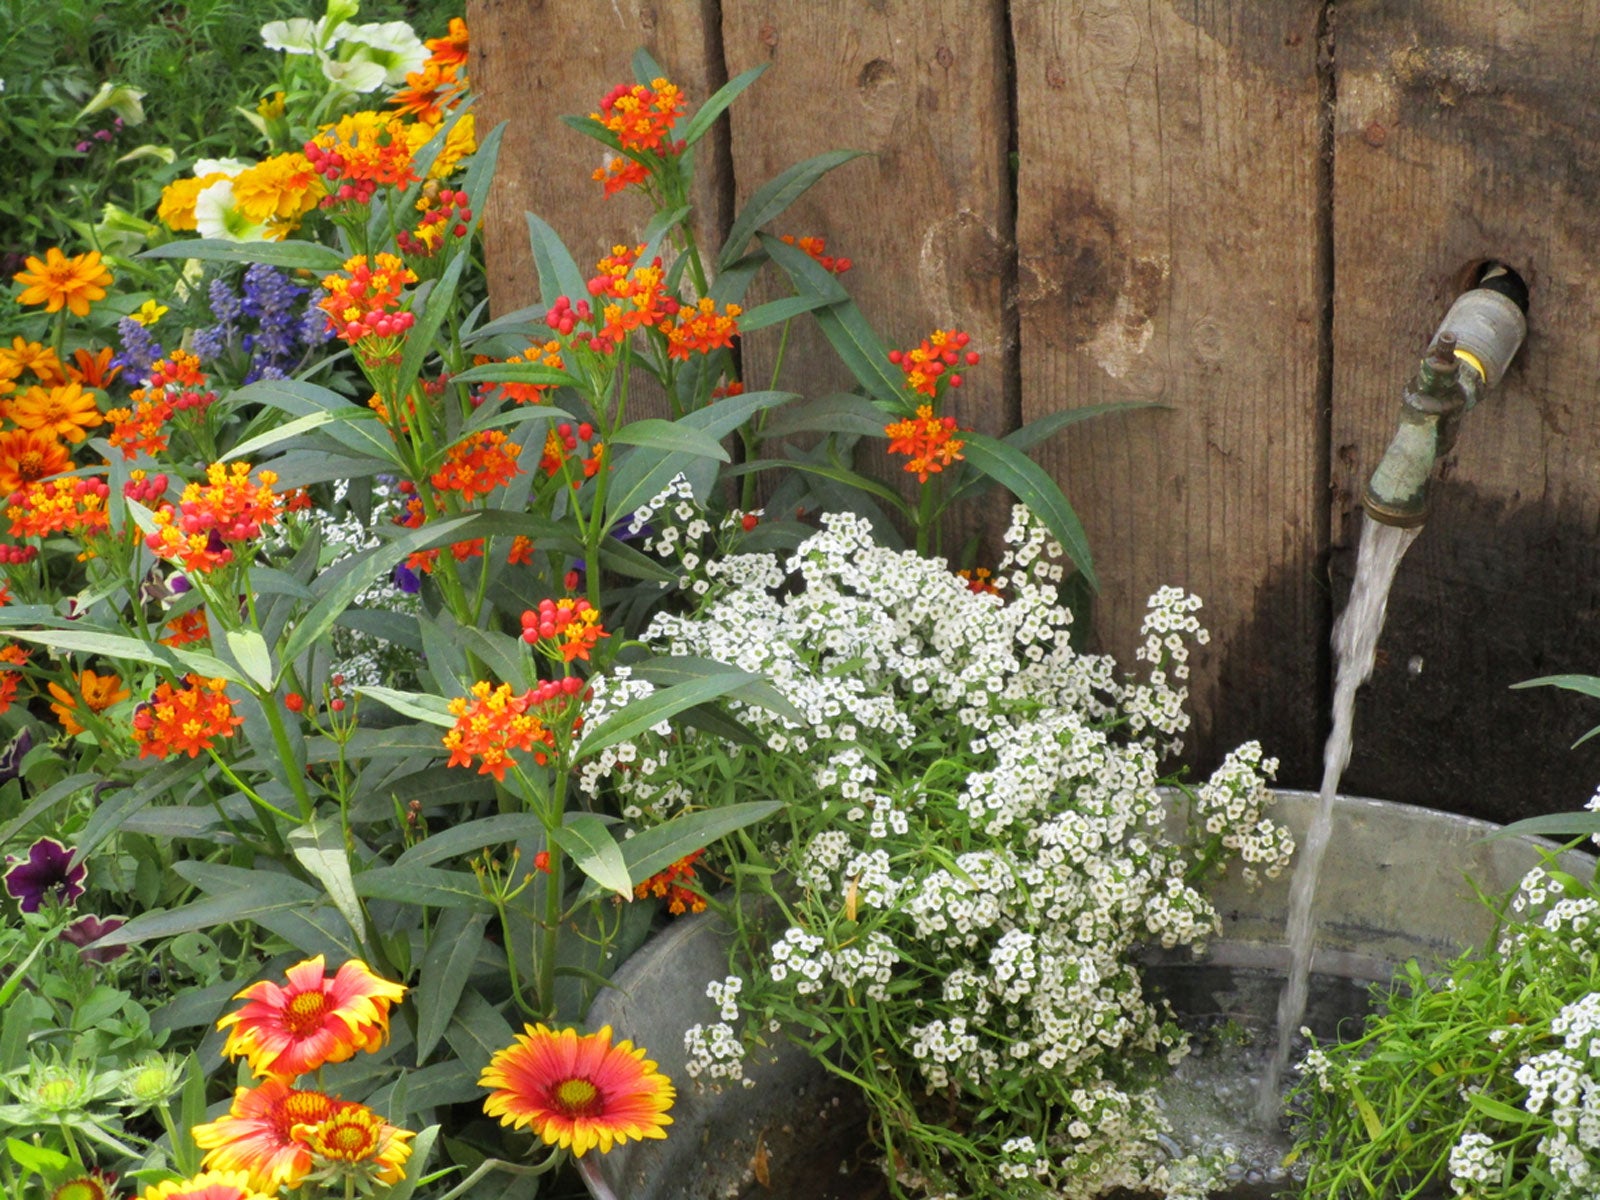 Gardening With Microclimates In Mind Using Microclimates Within Your